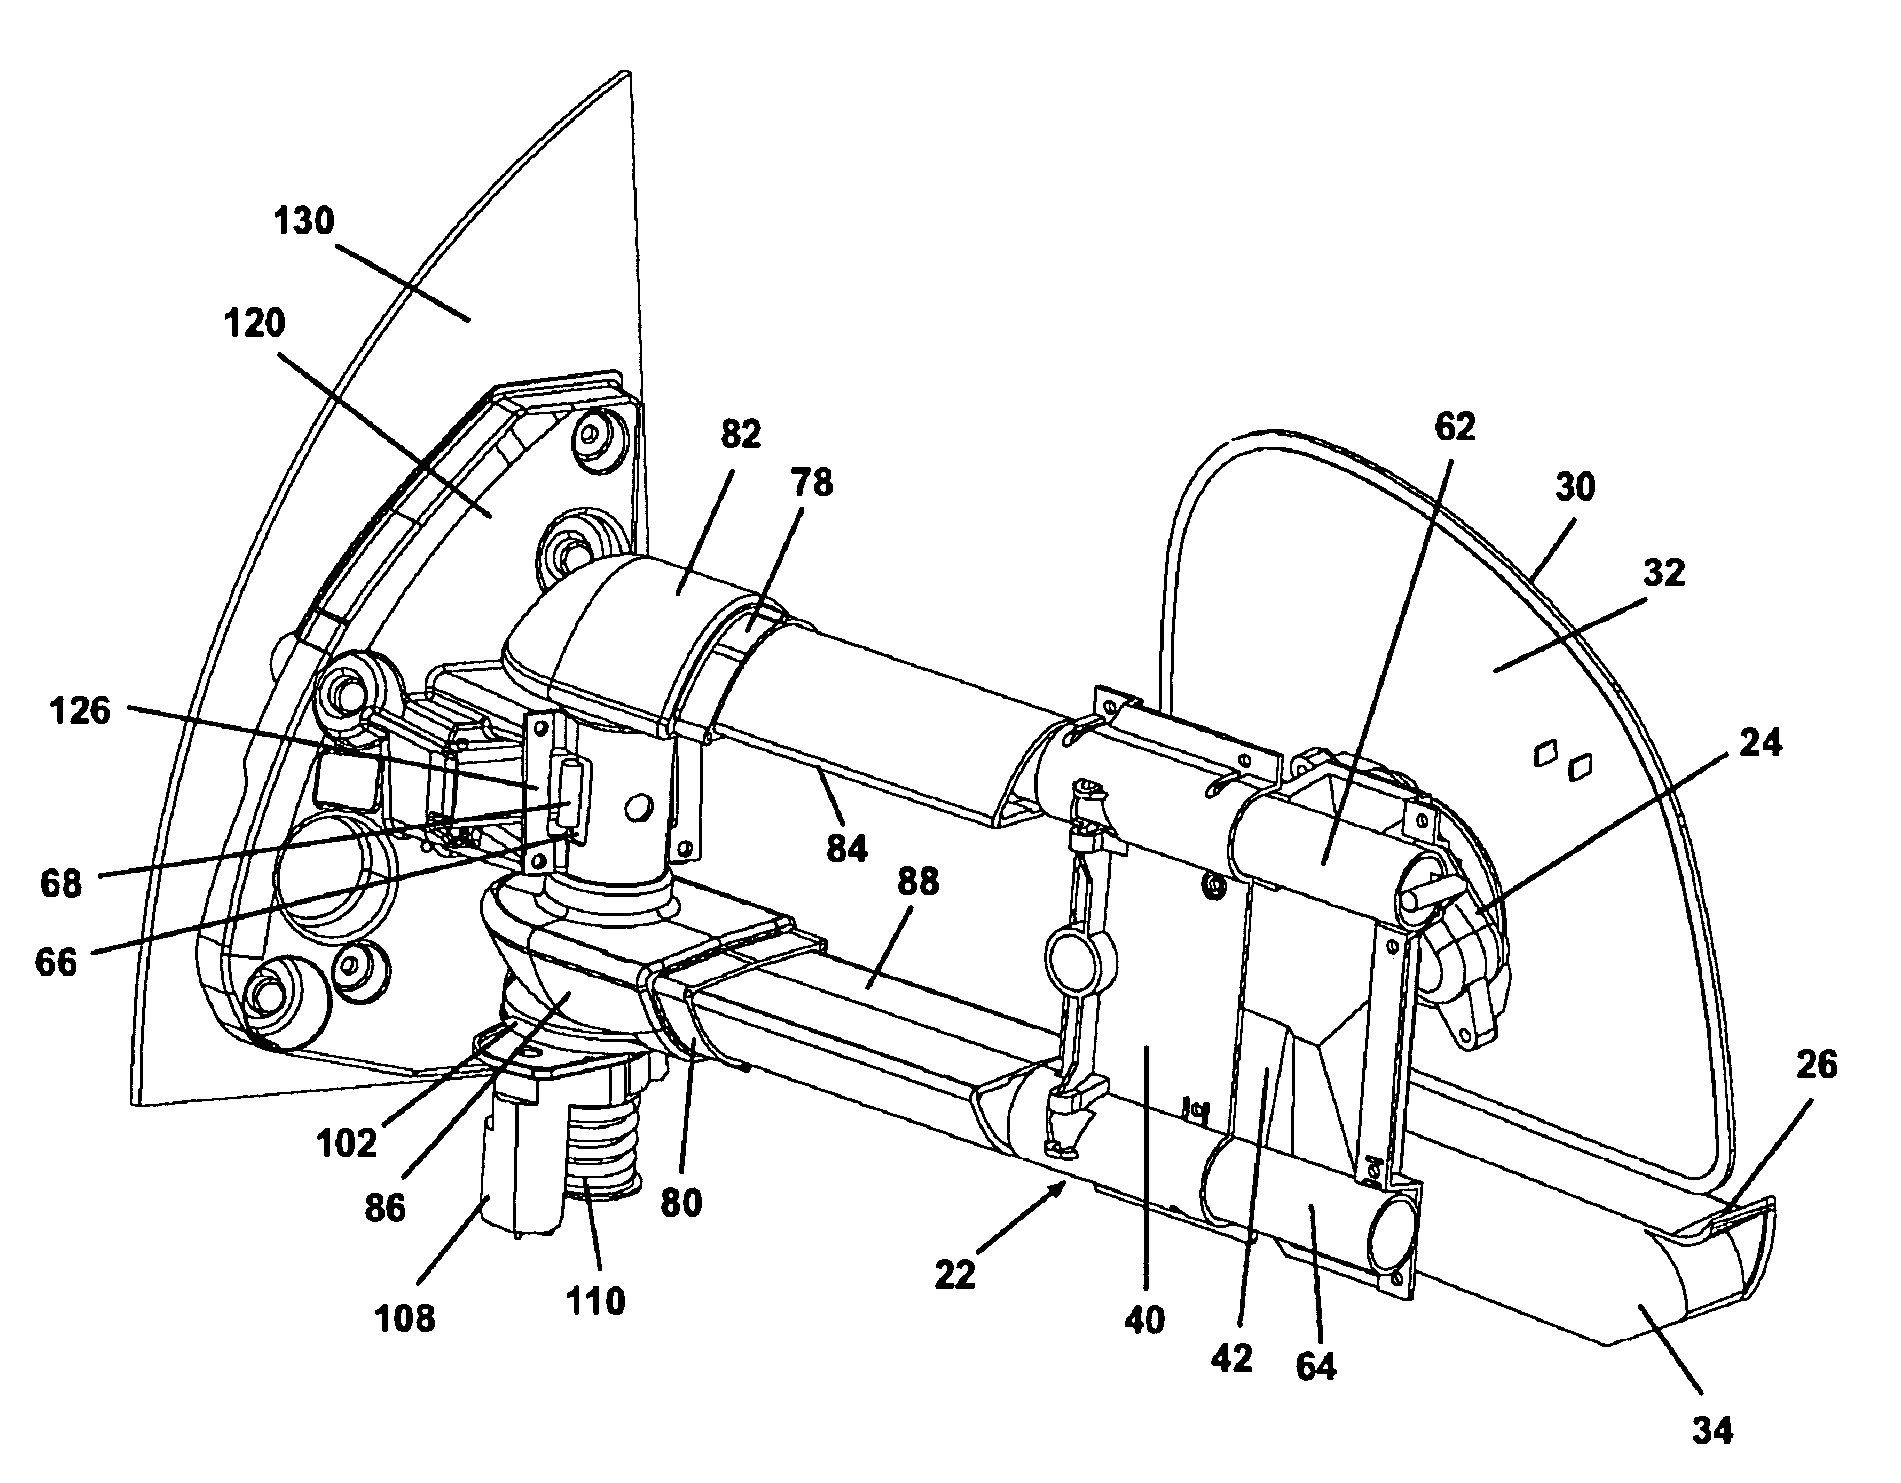 Twin-arm vehicle mirror with powerfold and powerextend features